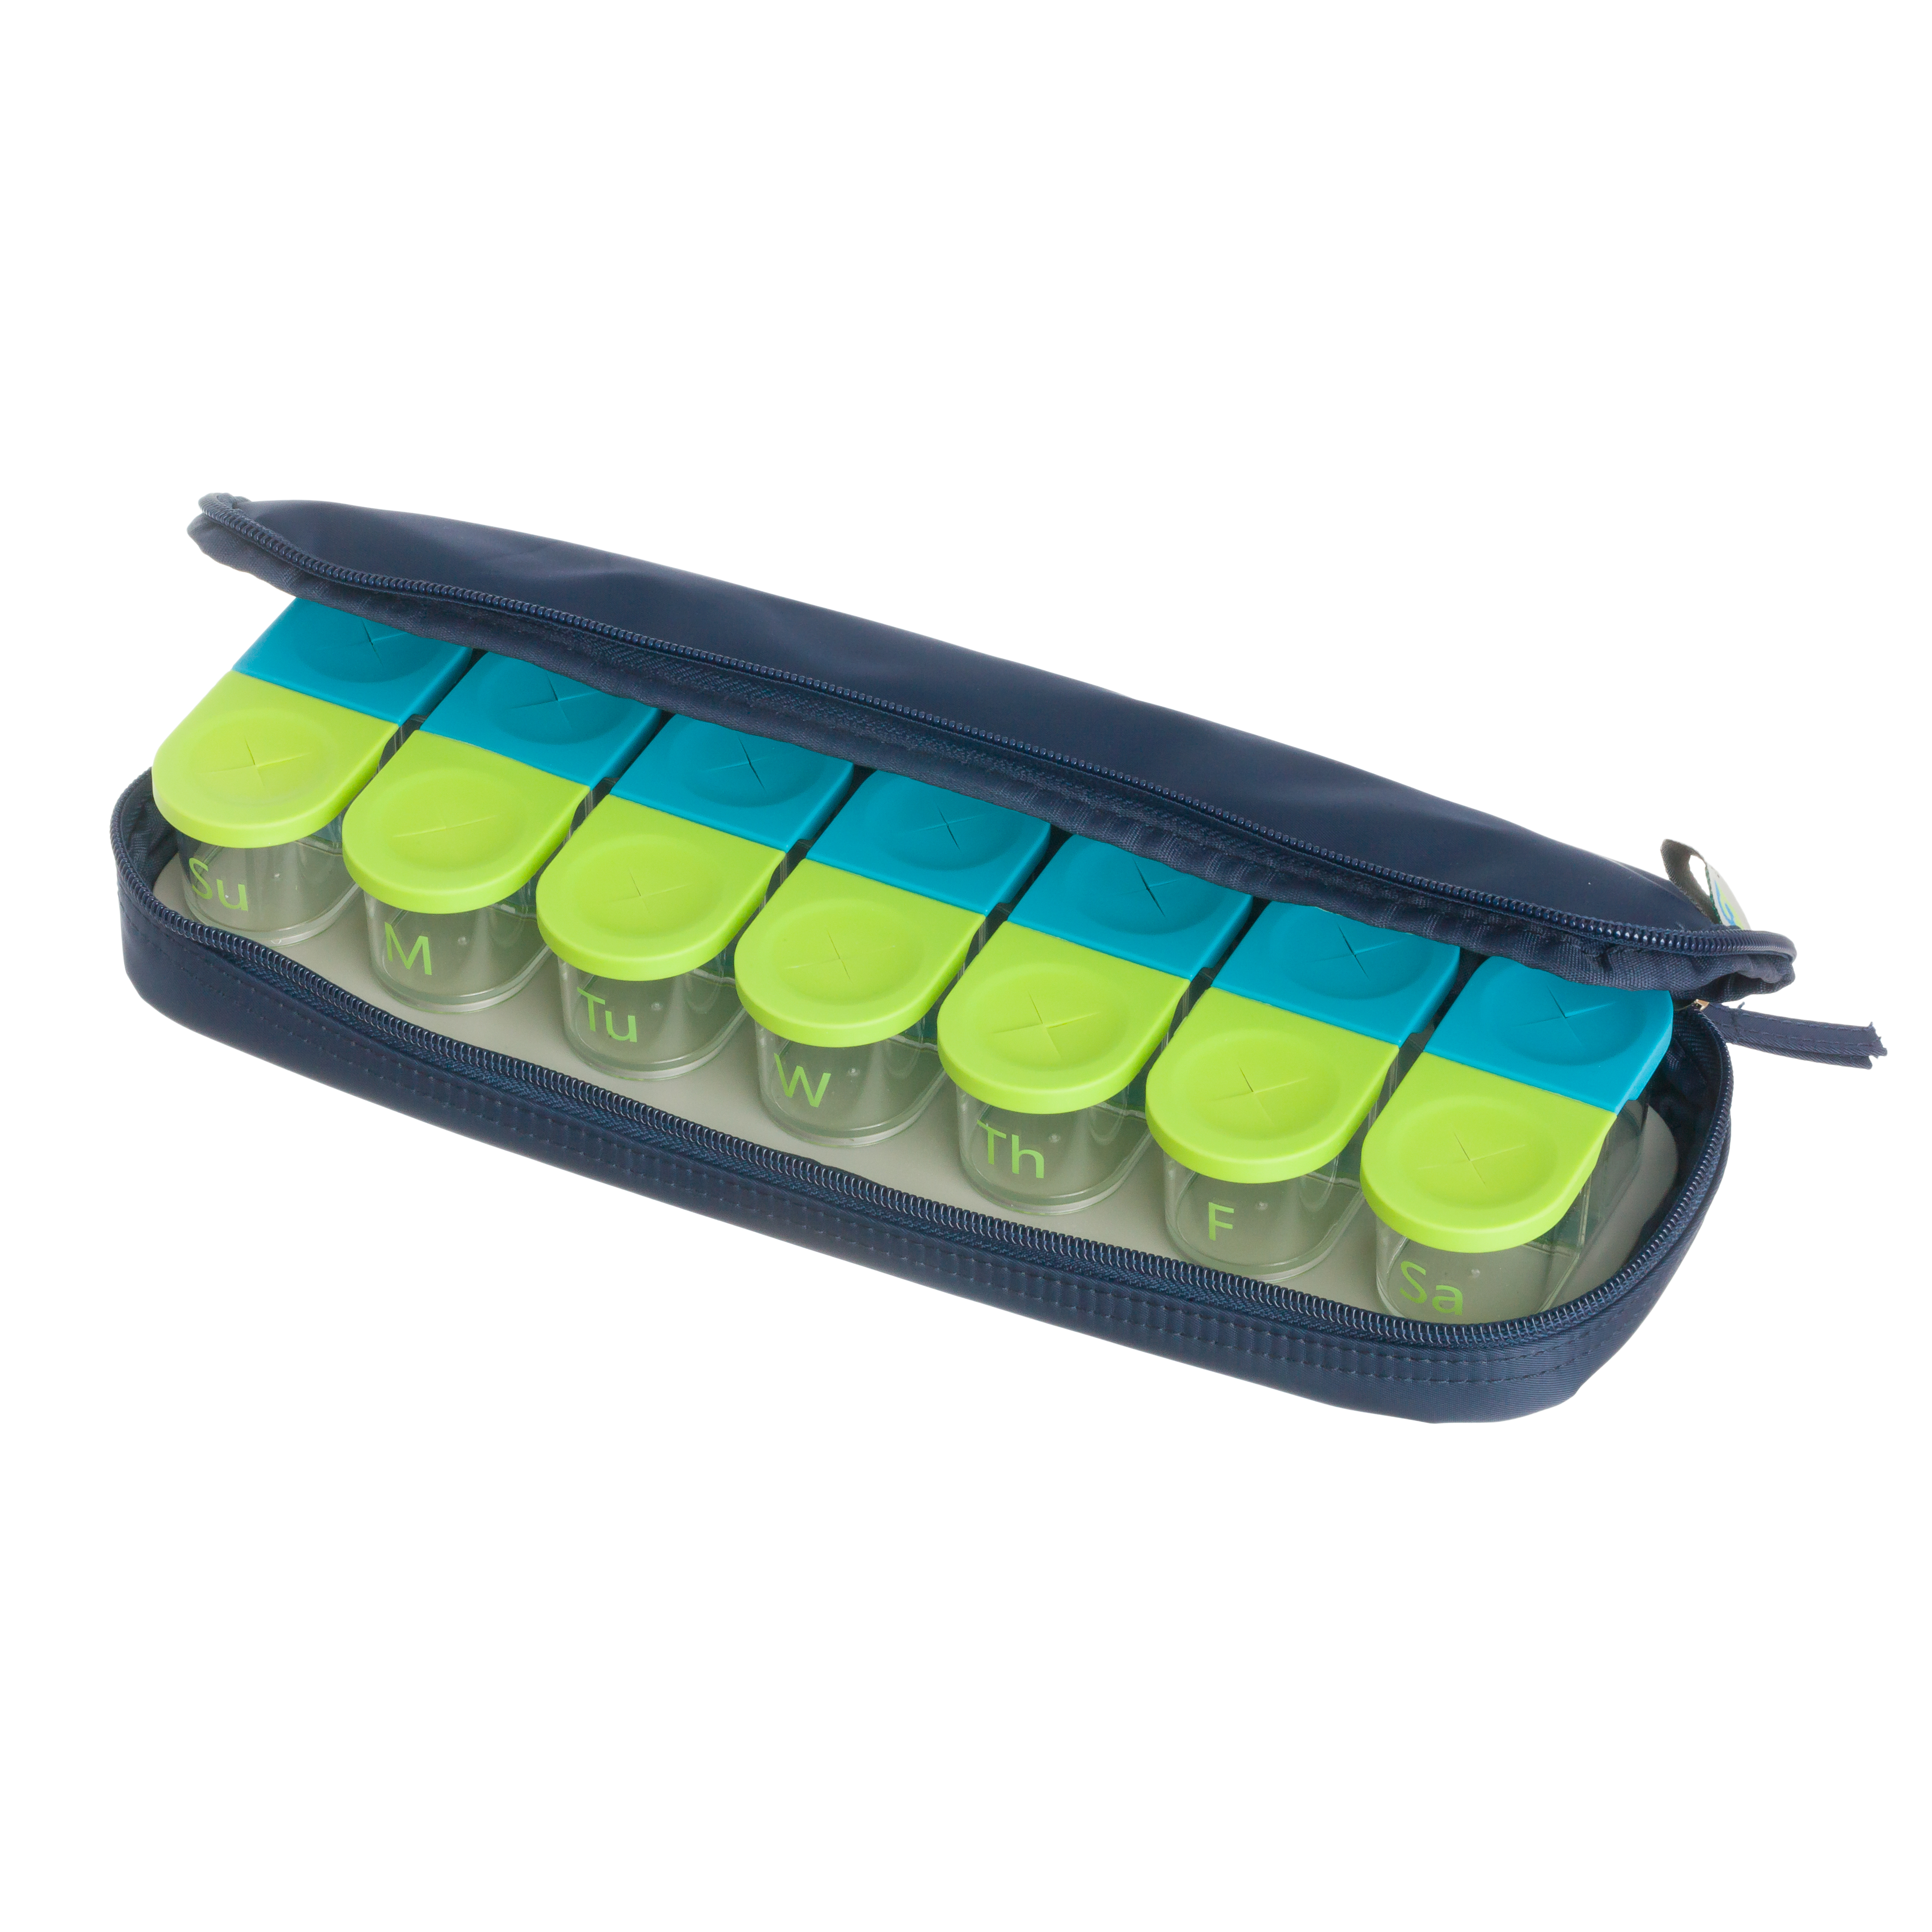 Sagely Smart Weekly Pill Organizer - Sleek AM/PM Twice A Day Pill Box with 7 Day